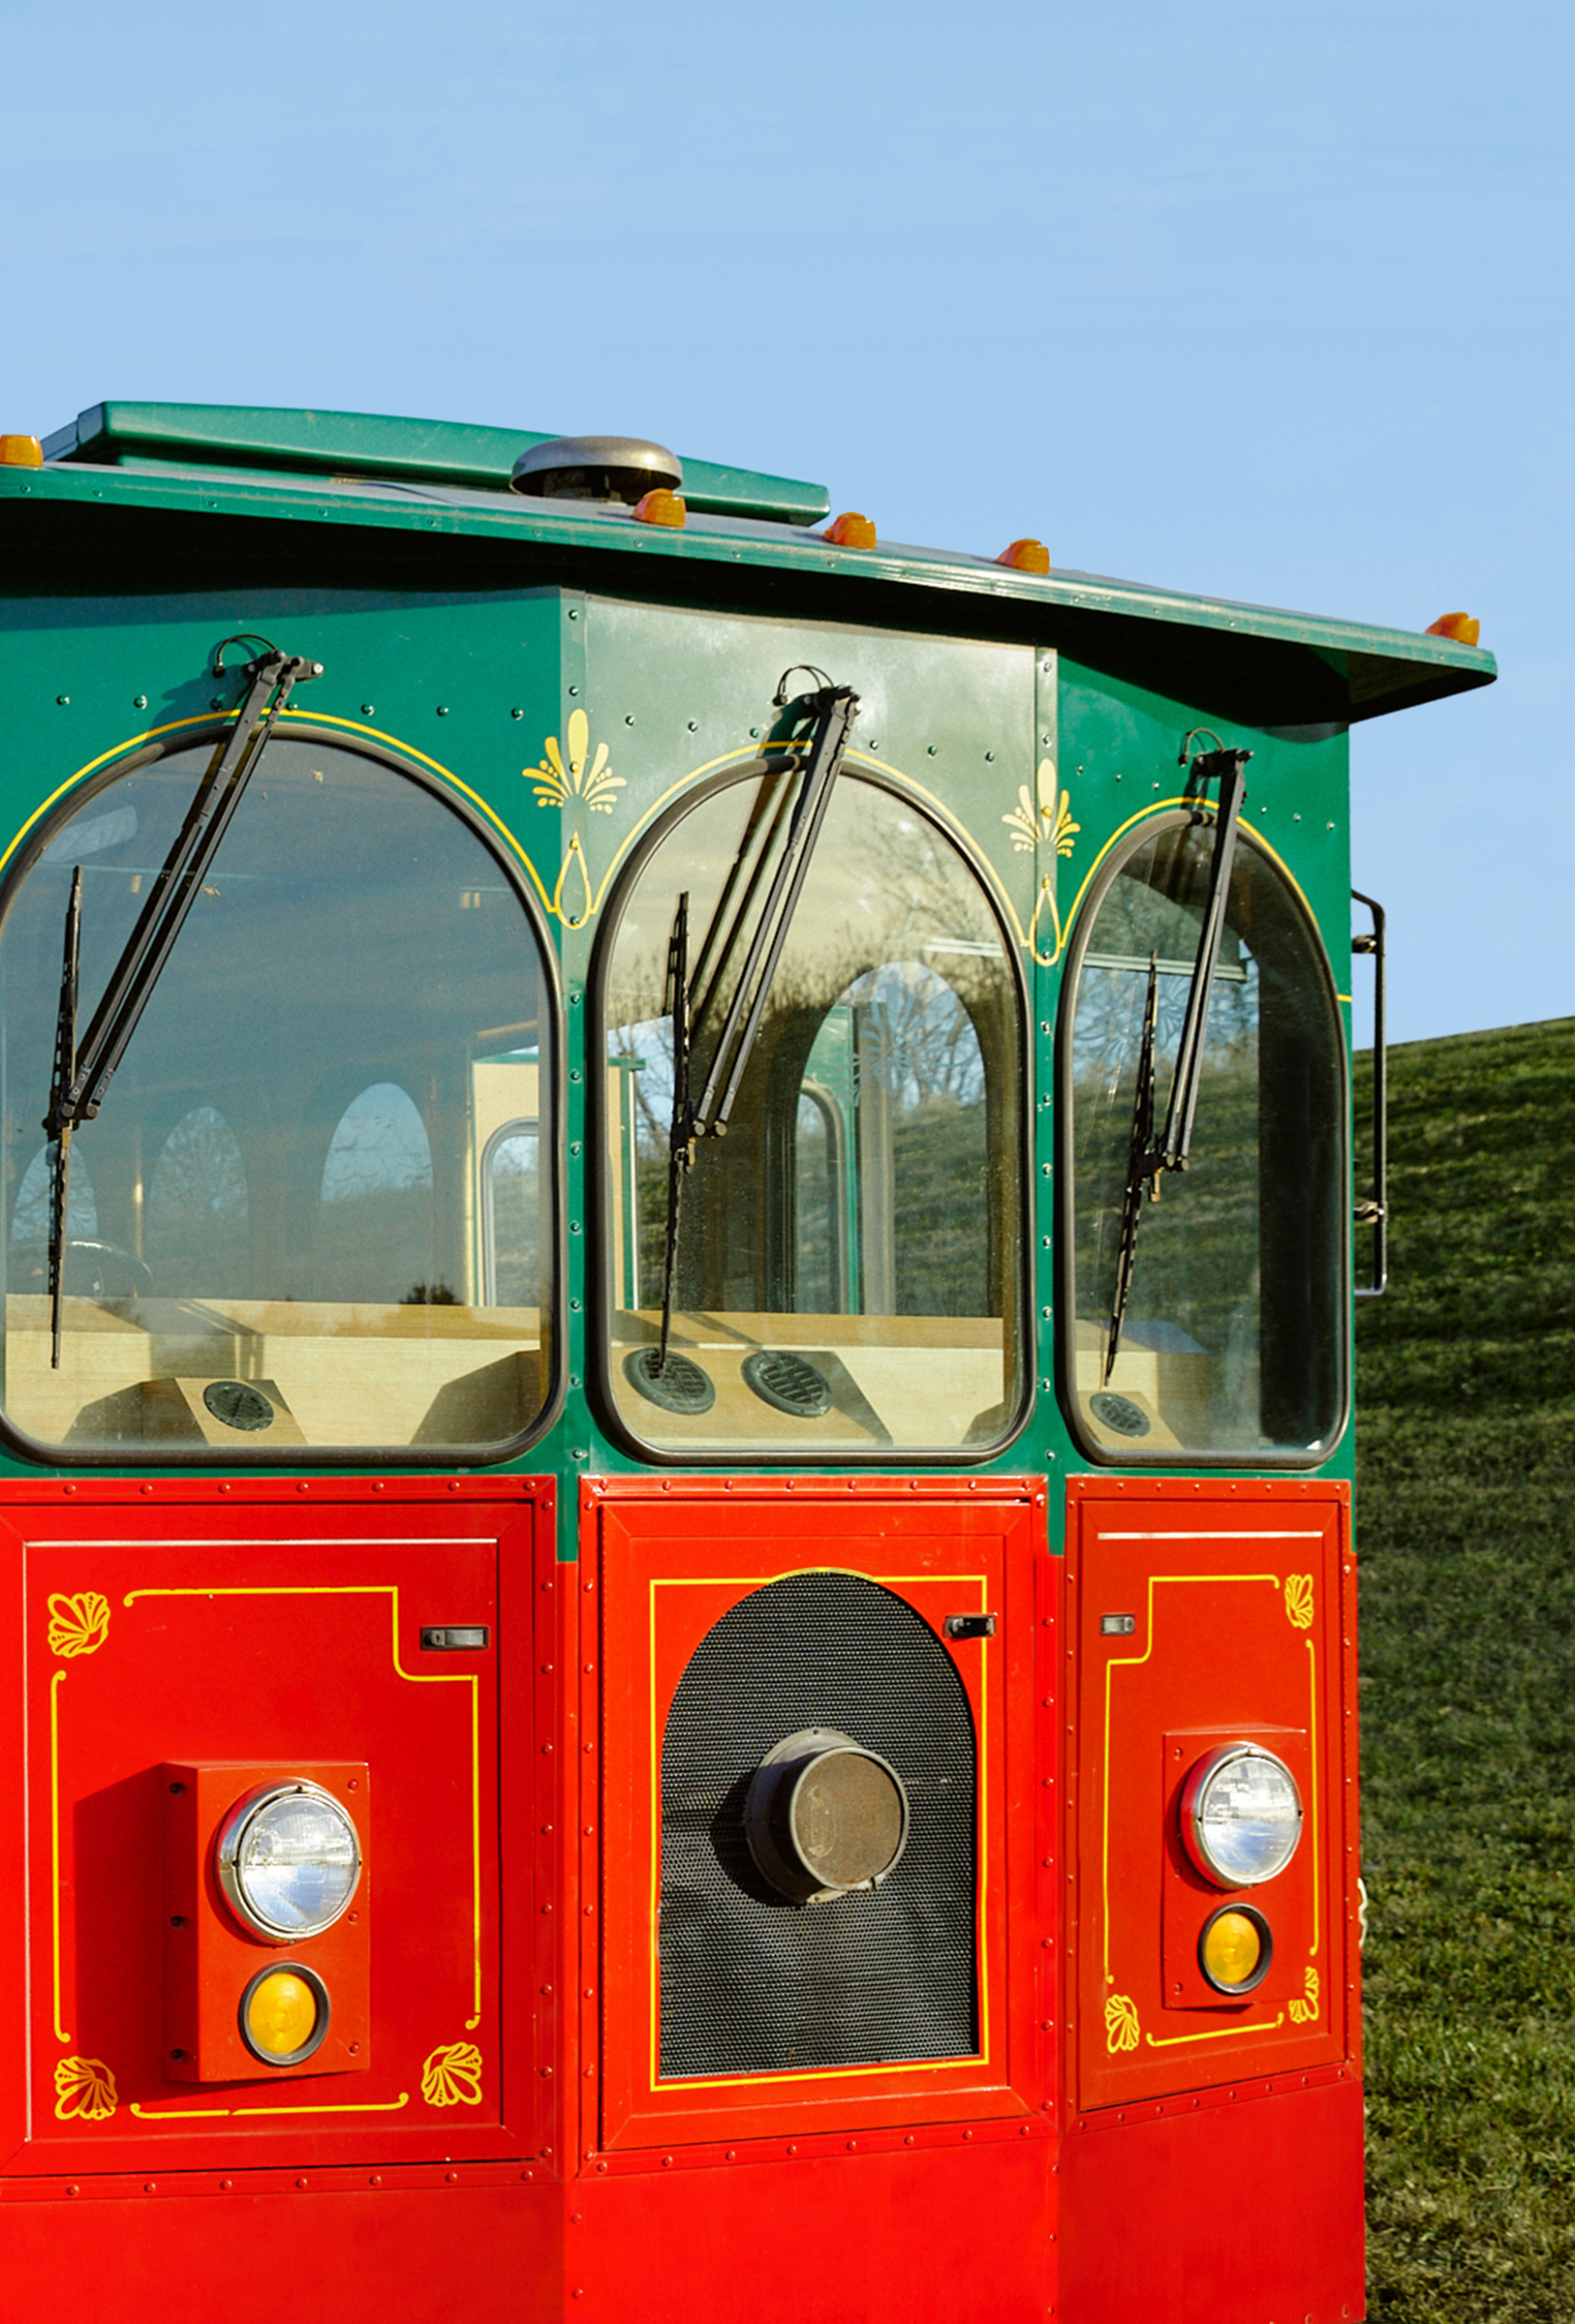 Vintage red and green trolley at sunset